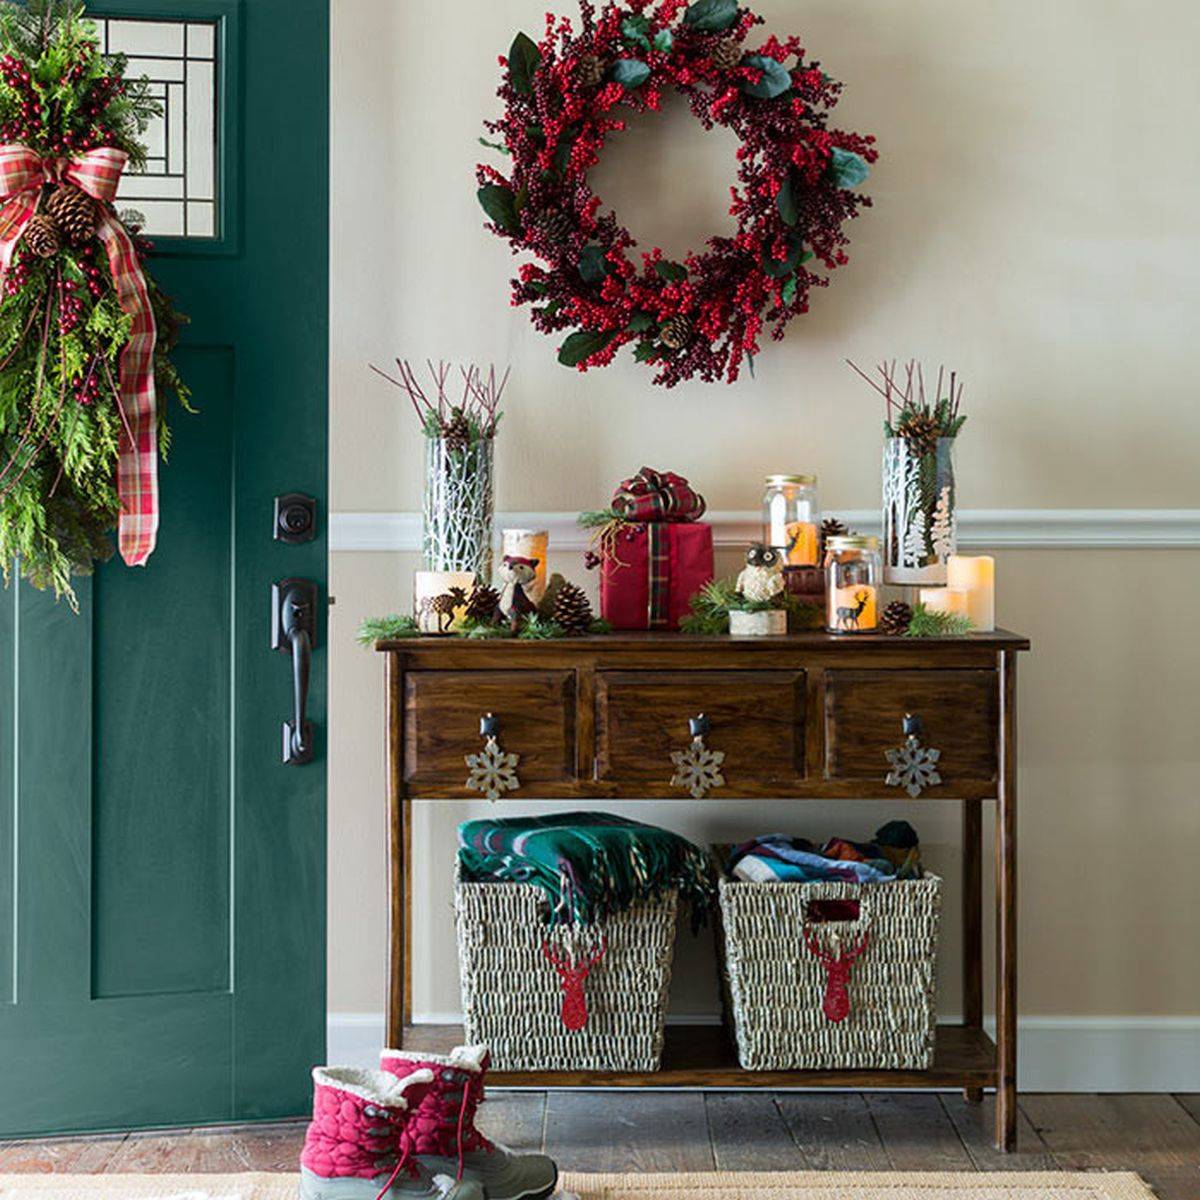 Lovely Christmas wreath adds Holiday cheer to this entry in an understated manner